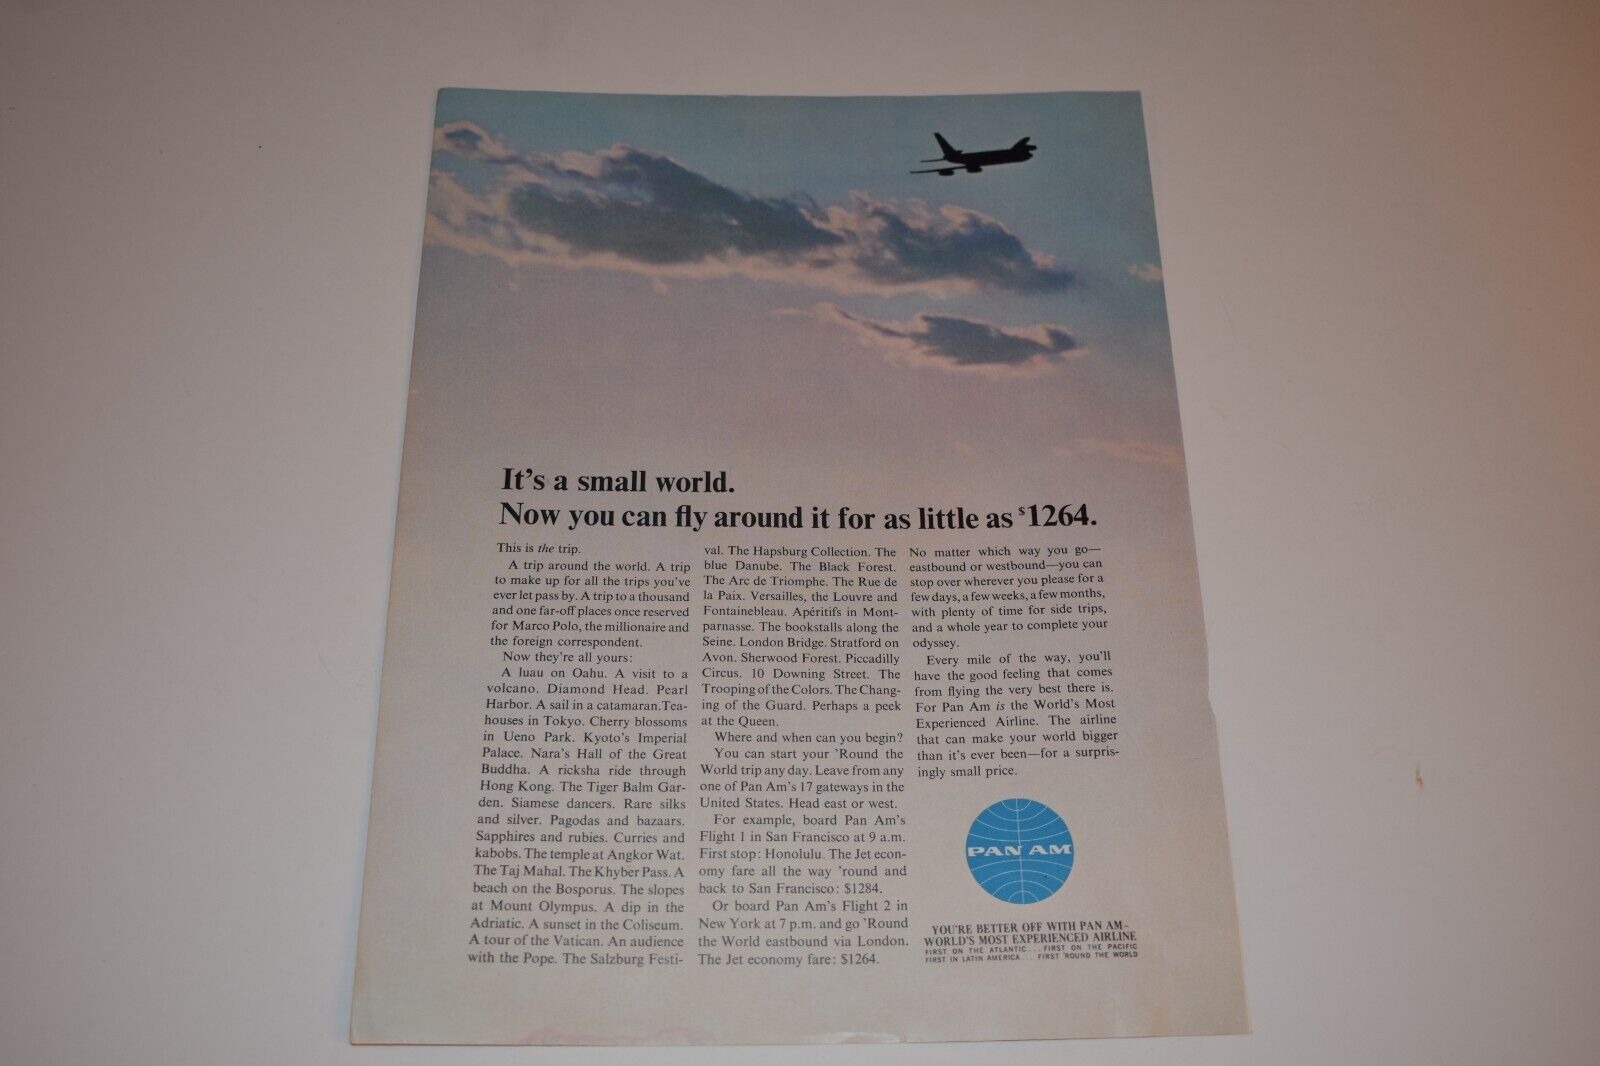 Vintage 1965 Pan Am Airline Around the World Print Ad.